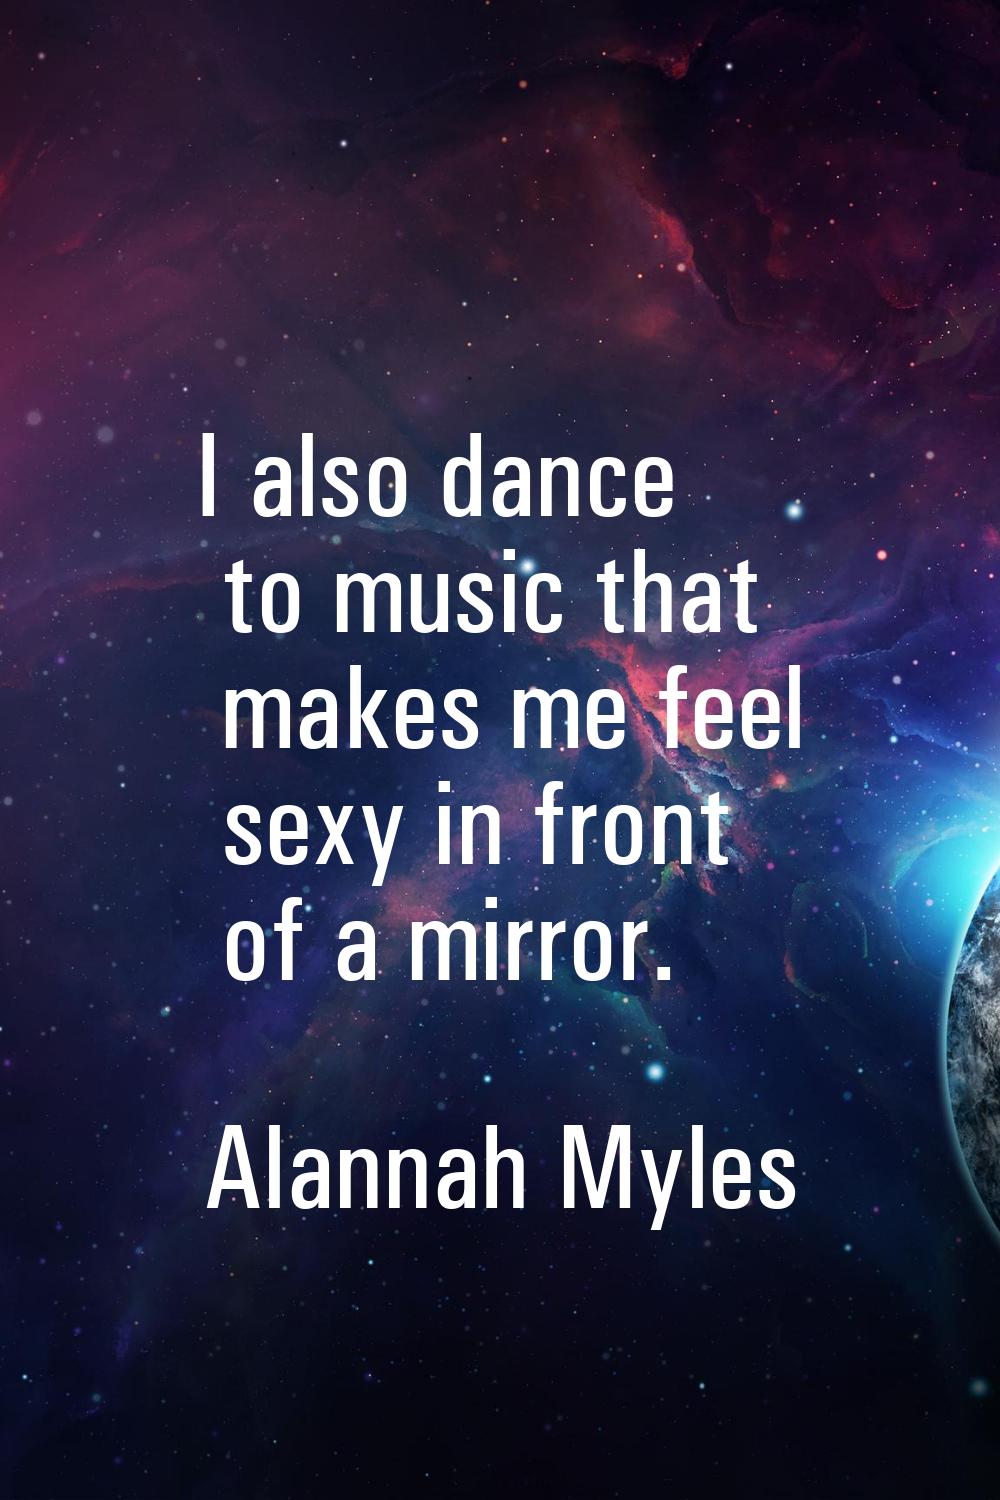 I also dance to music that makes me feel sexy in front of a mirror.